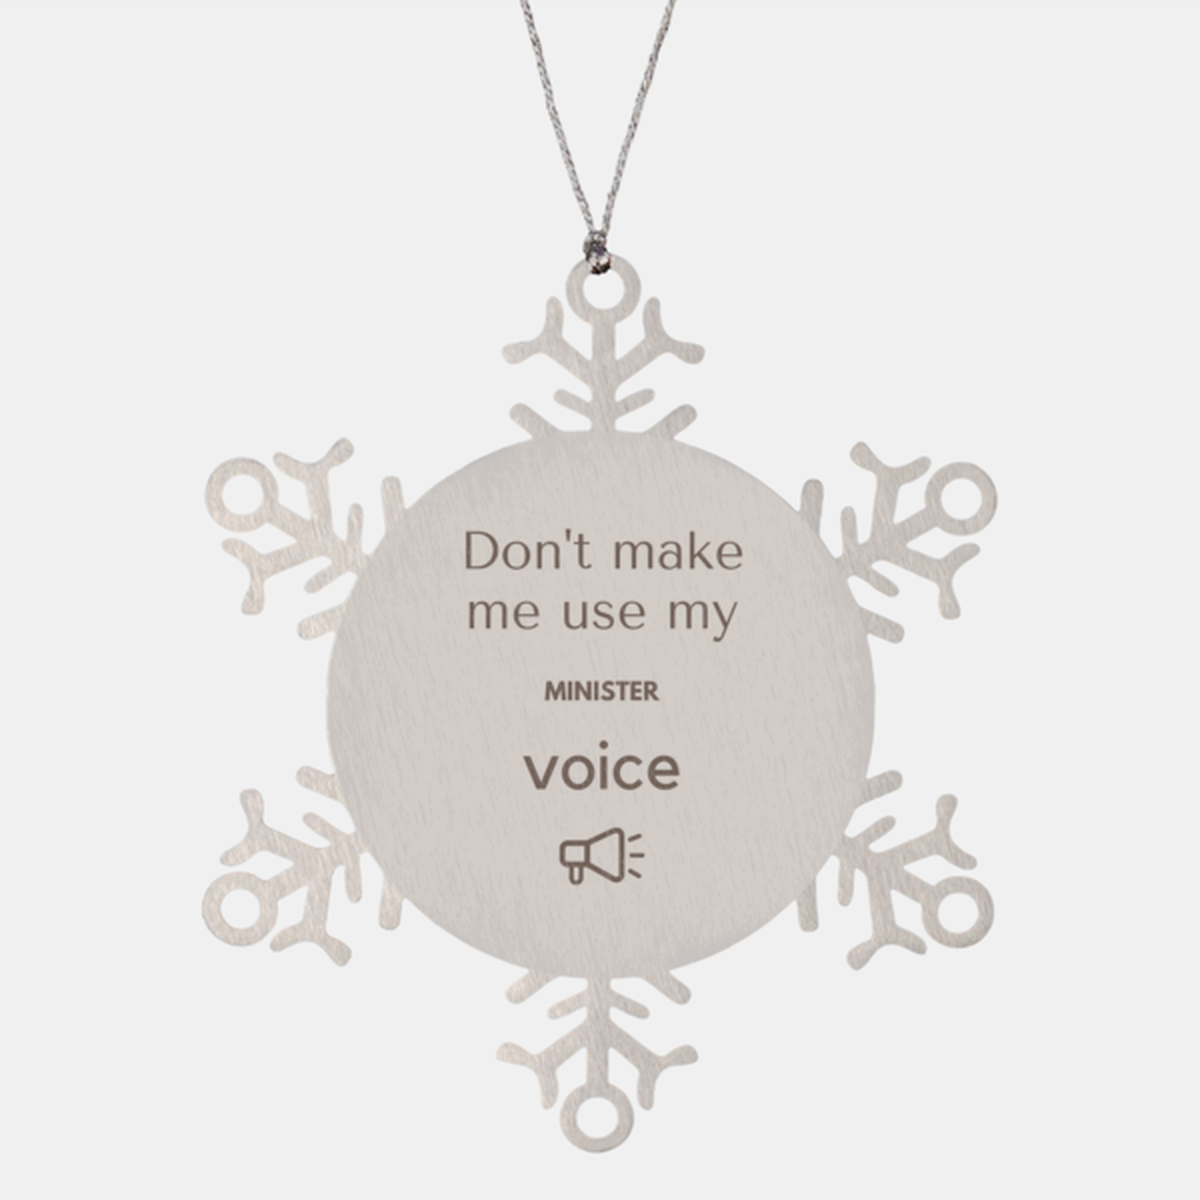 Don't make me use my Minister voice, Sarcasm Minister Ornament Gifts, Christmas Minister Snowflake Ornament Unique Gifts For Minister Coworkers, Men, Women, Colleague, Friends